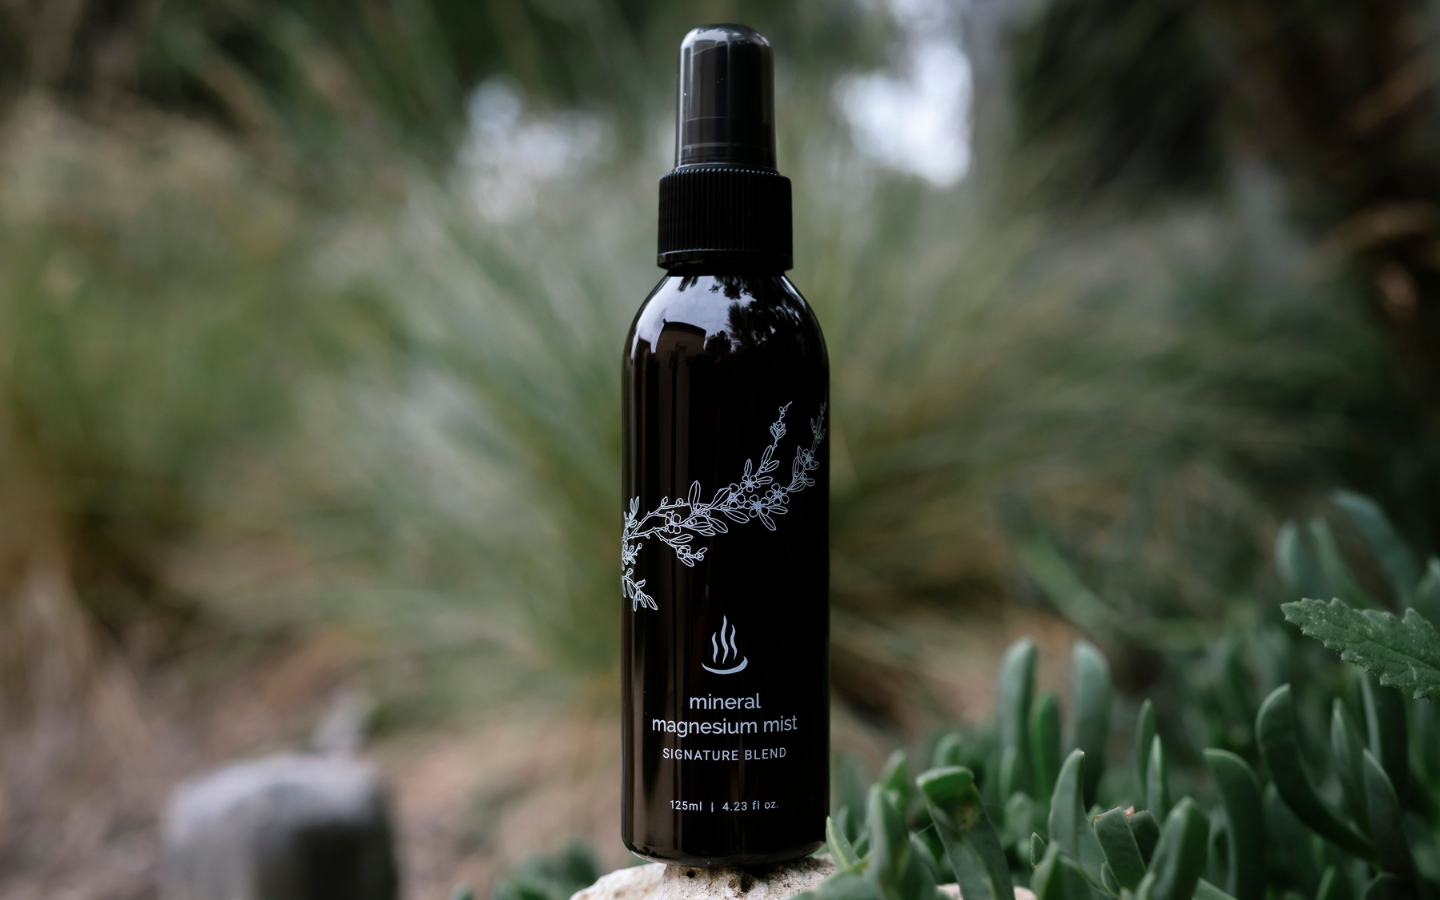 125ml spray bottle of mineral magnesium mist sitting in natural surrounds